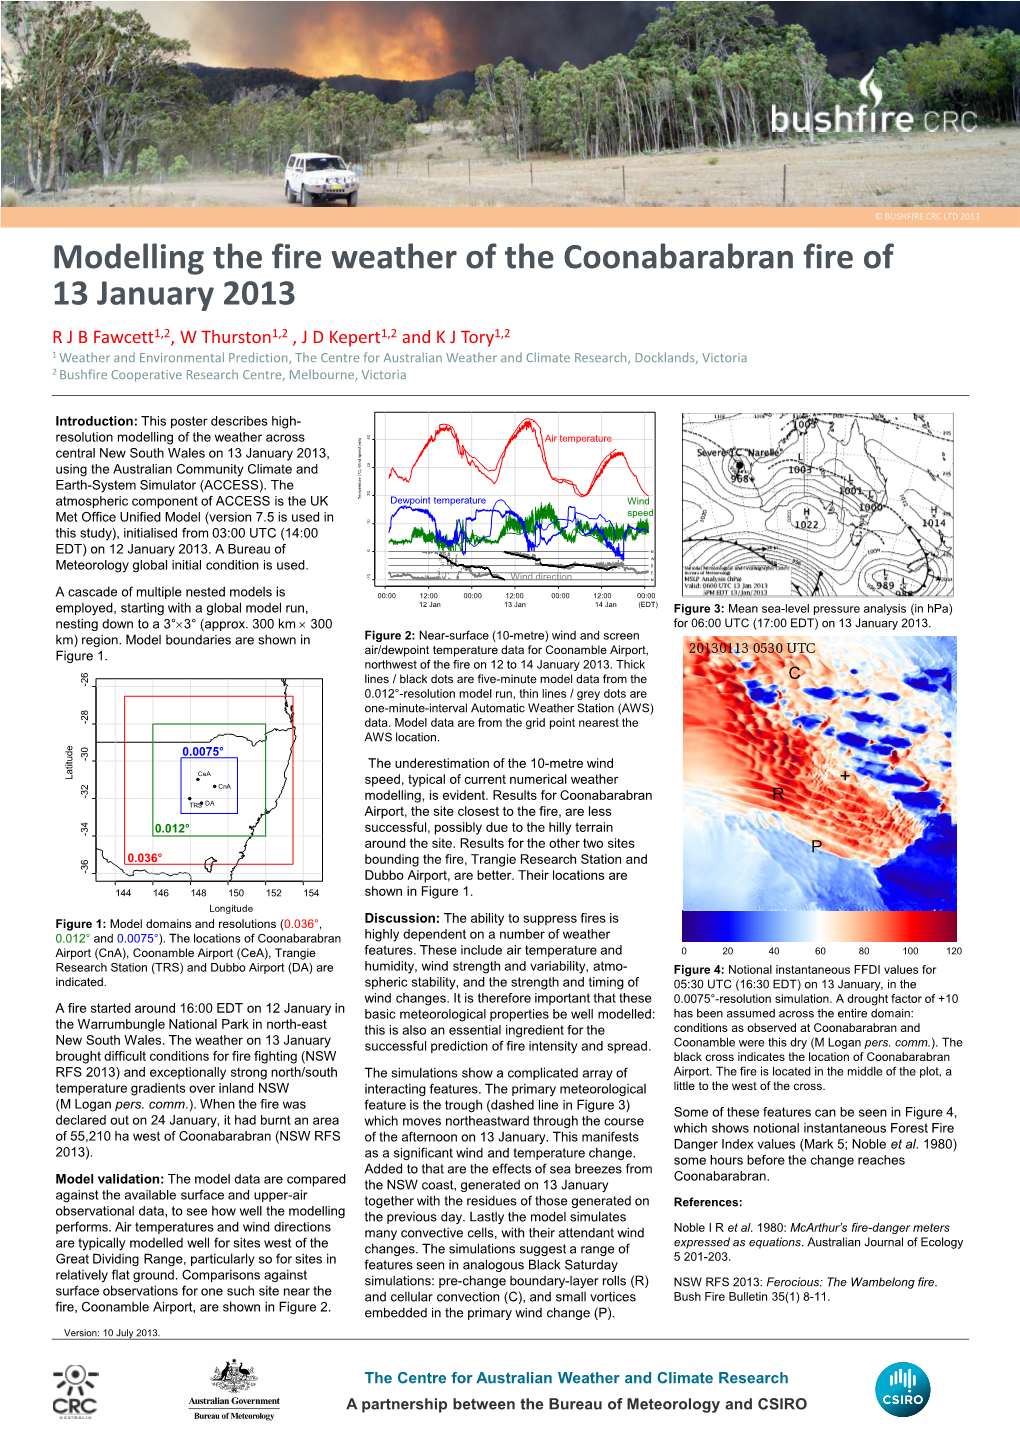 Modelling the Fire Weather of the Coonabarabran